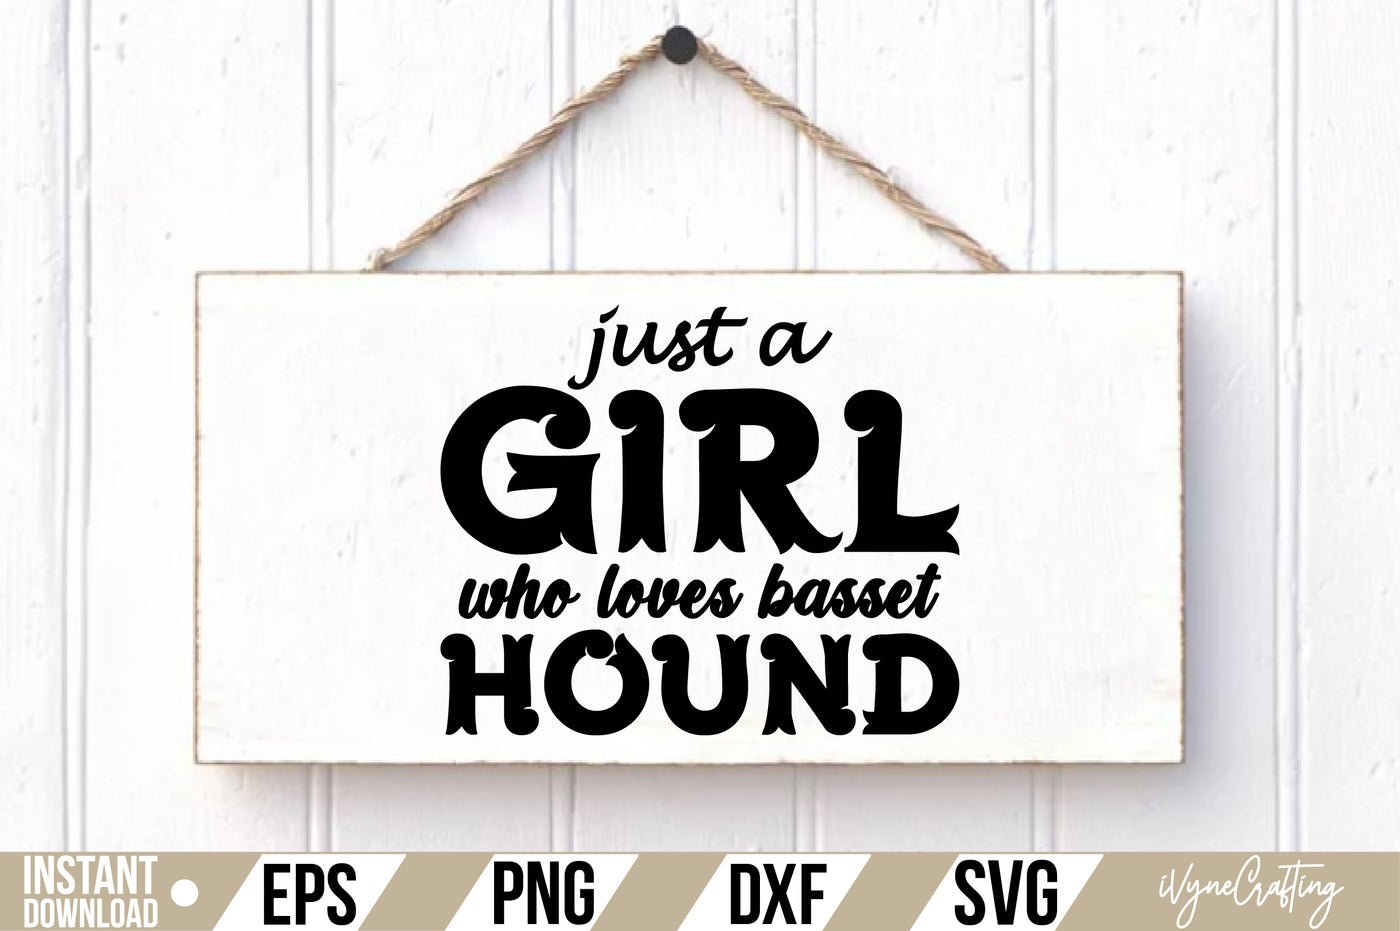 just a girl who loves basset hound SVG Cut File